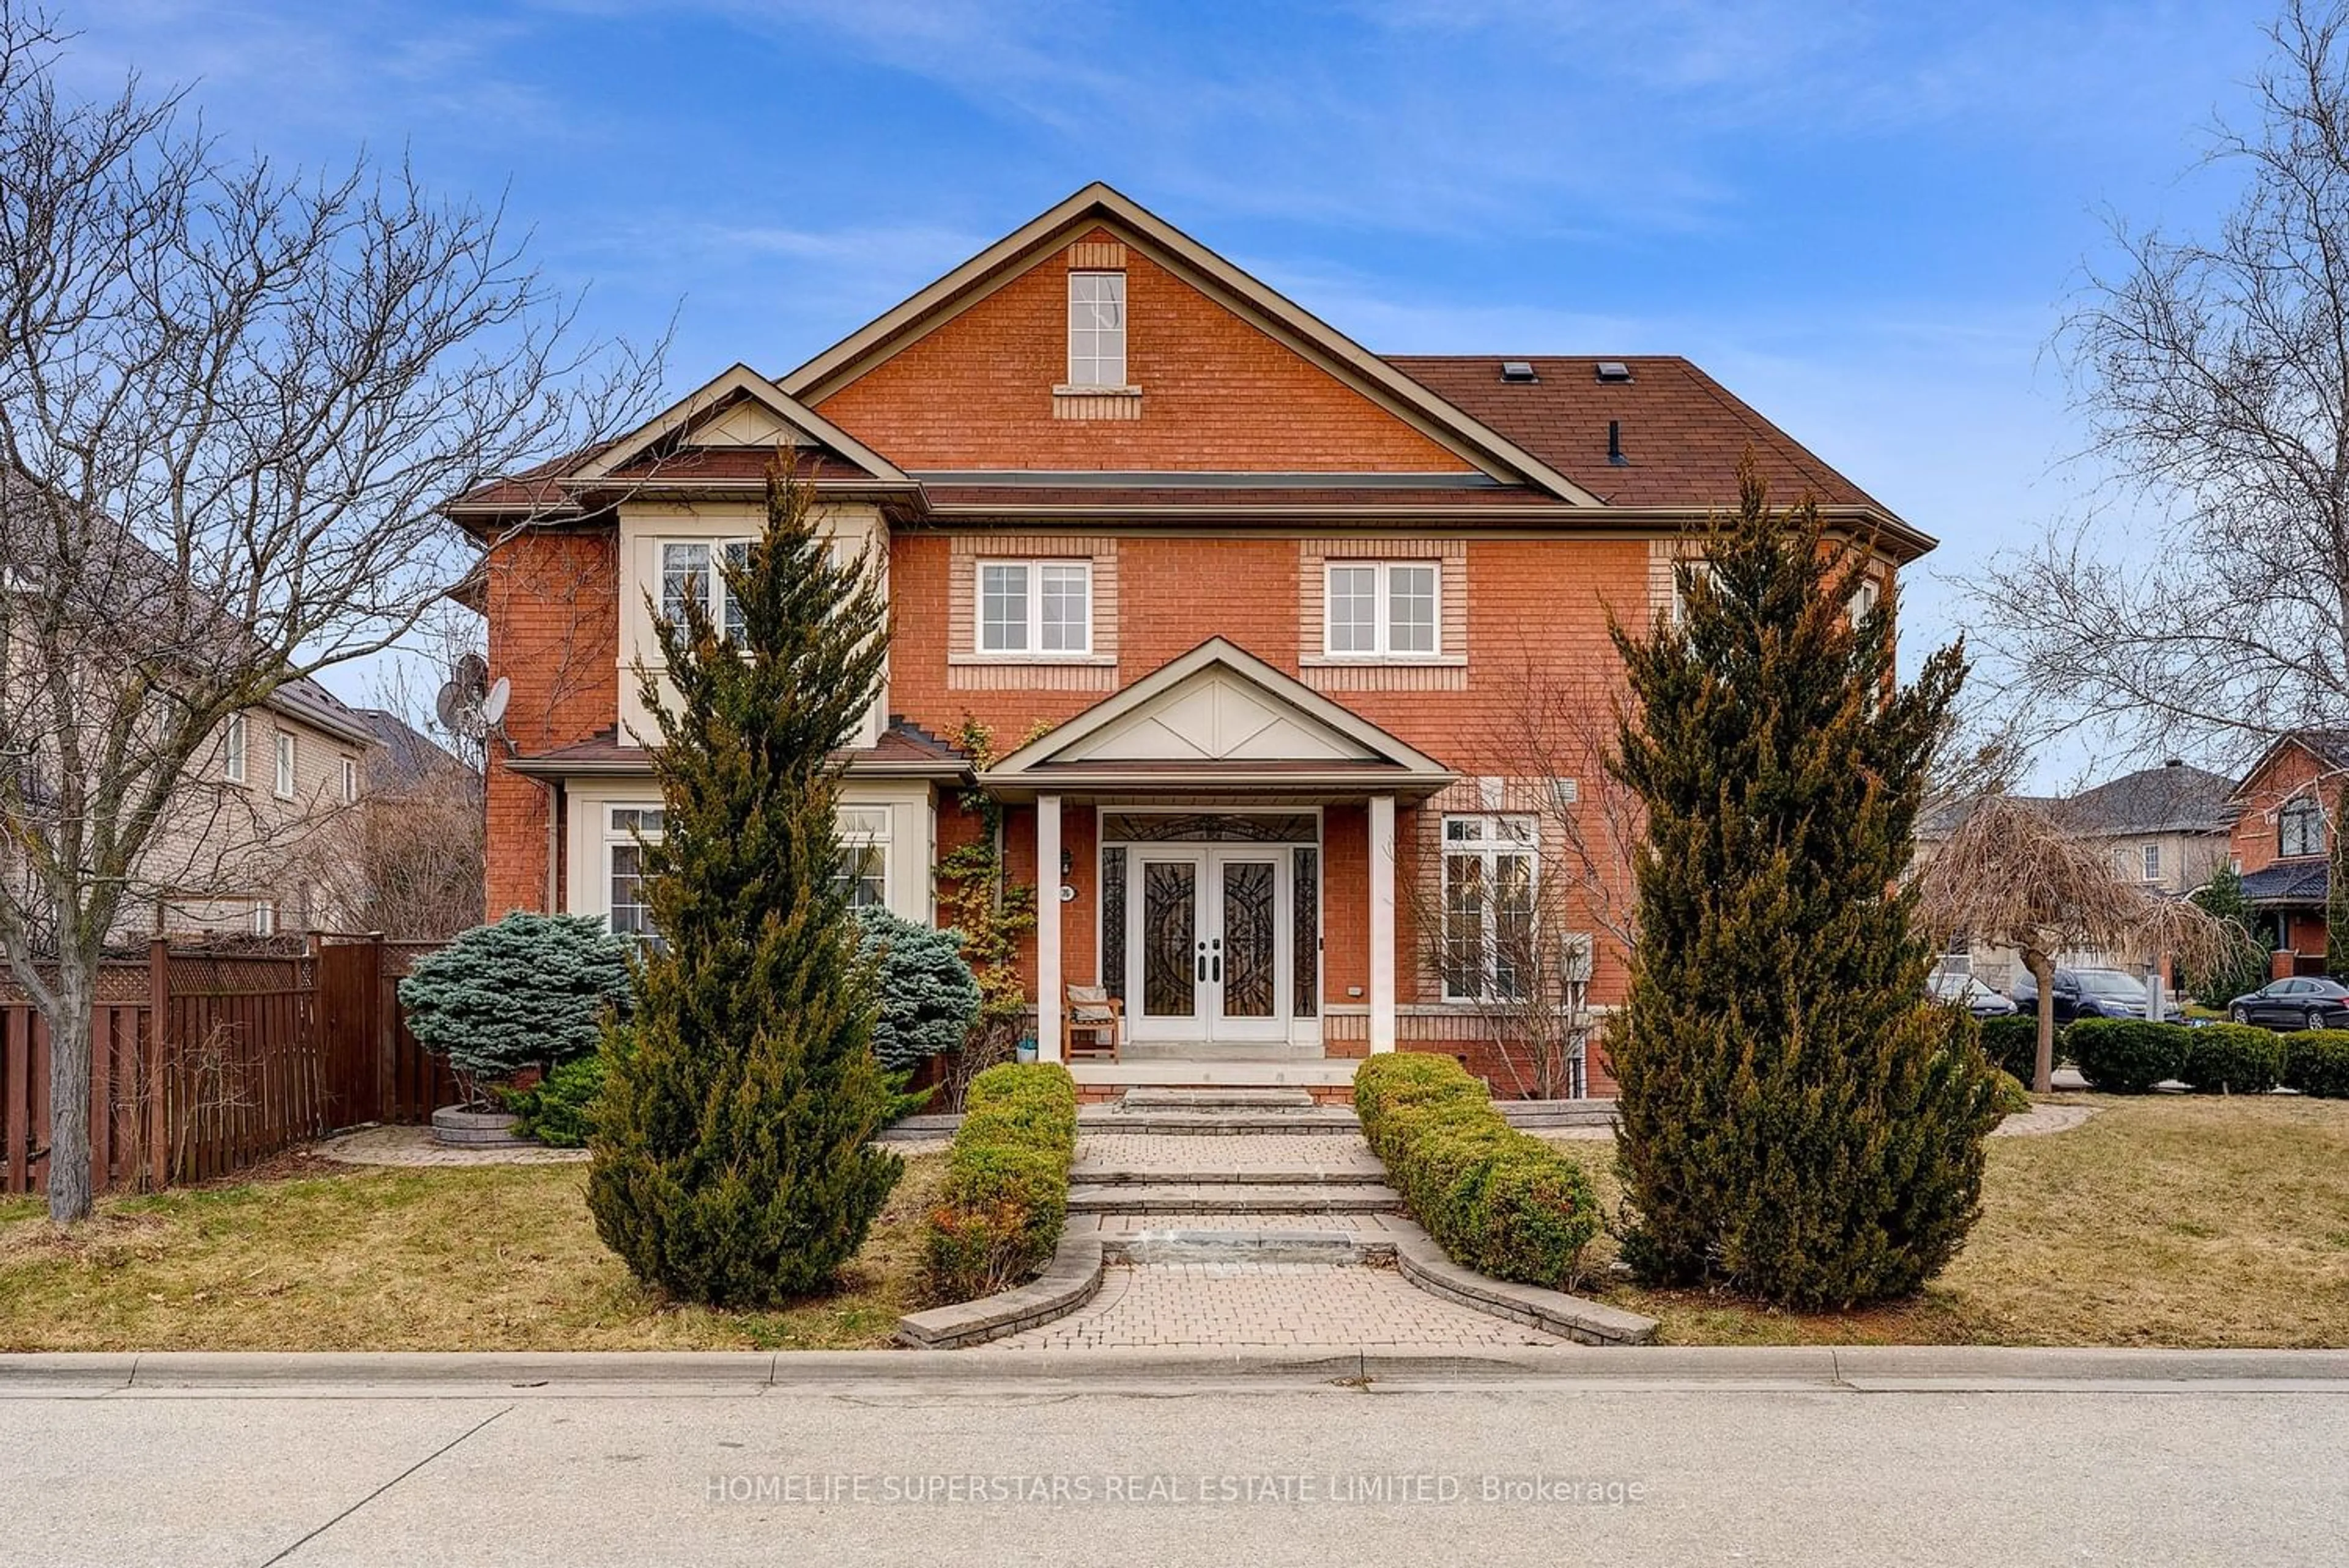 Home with brick exterior material for 76 Westway Cres, Vaughan Ontario L4K 5M1